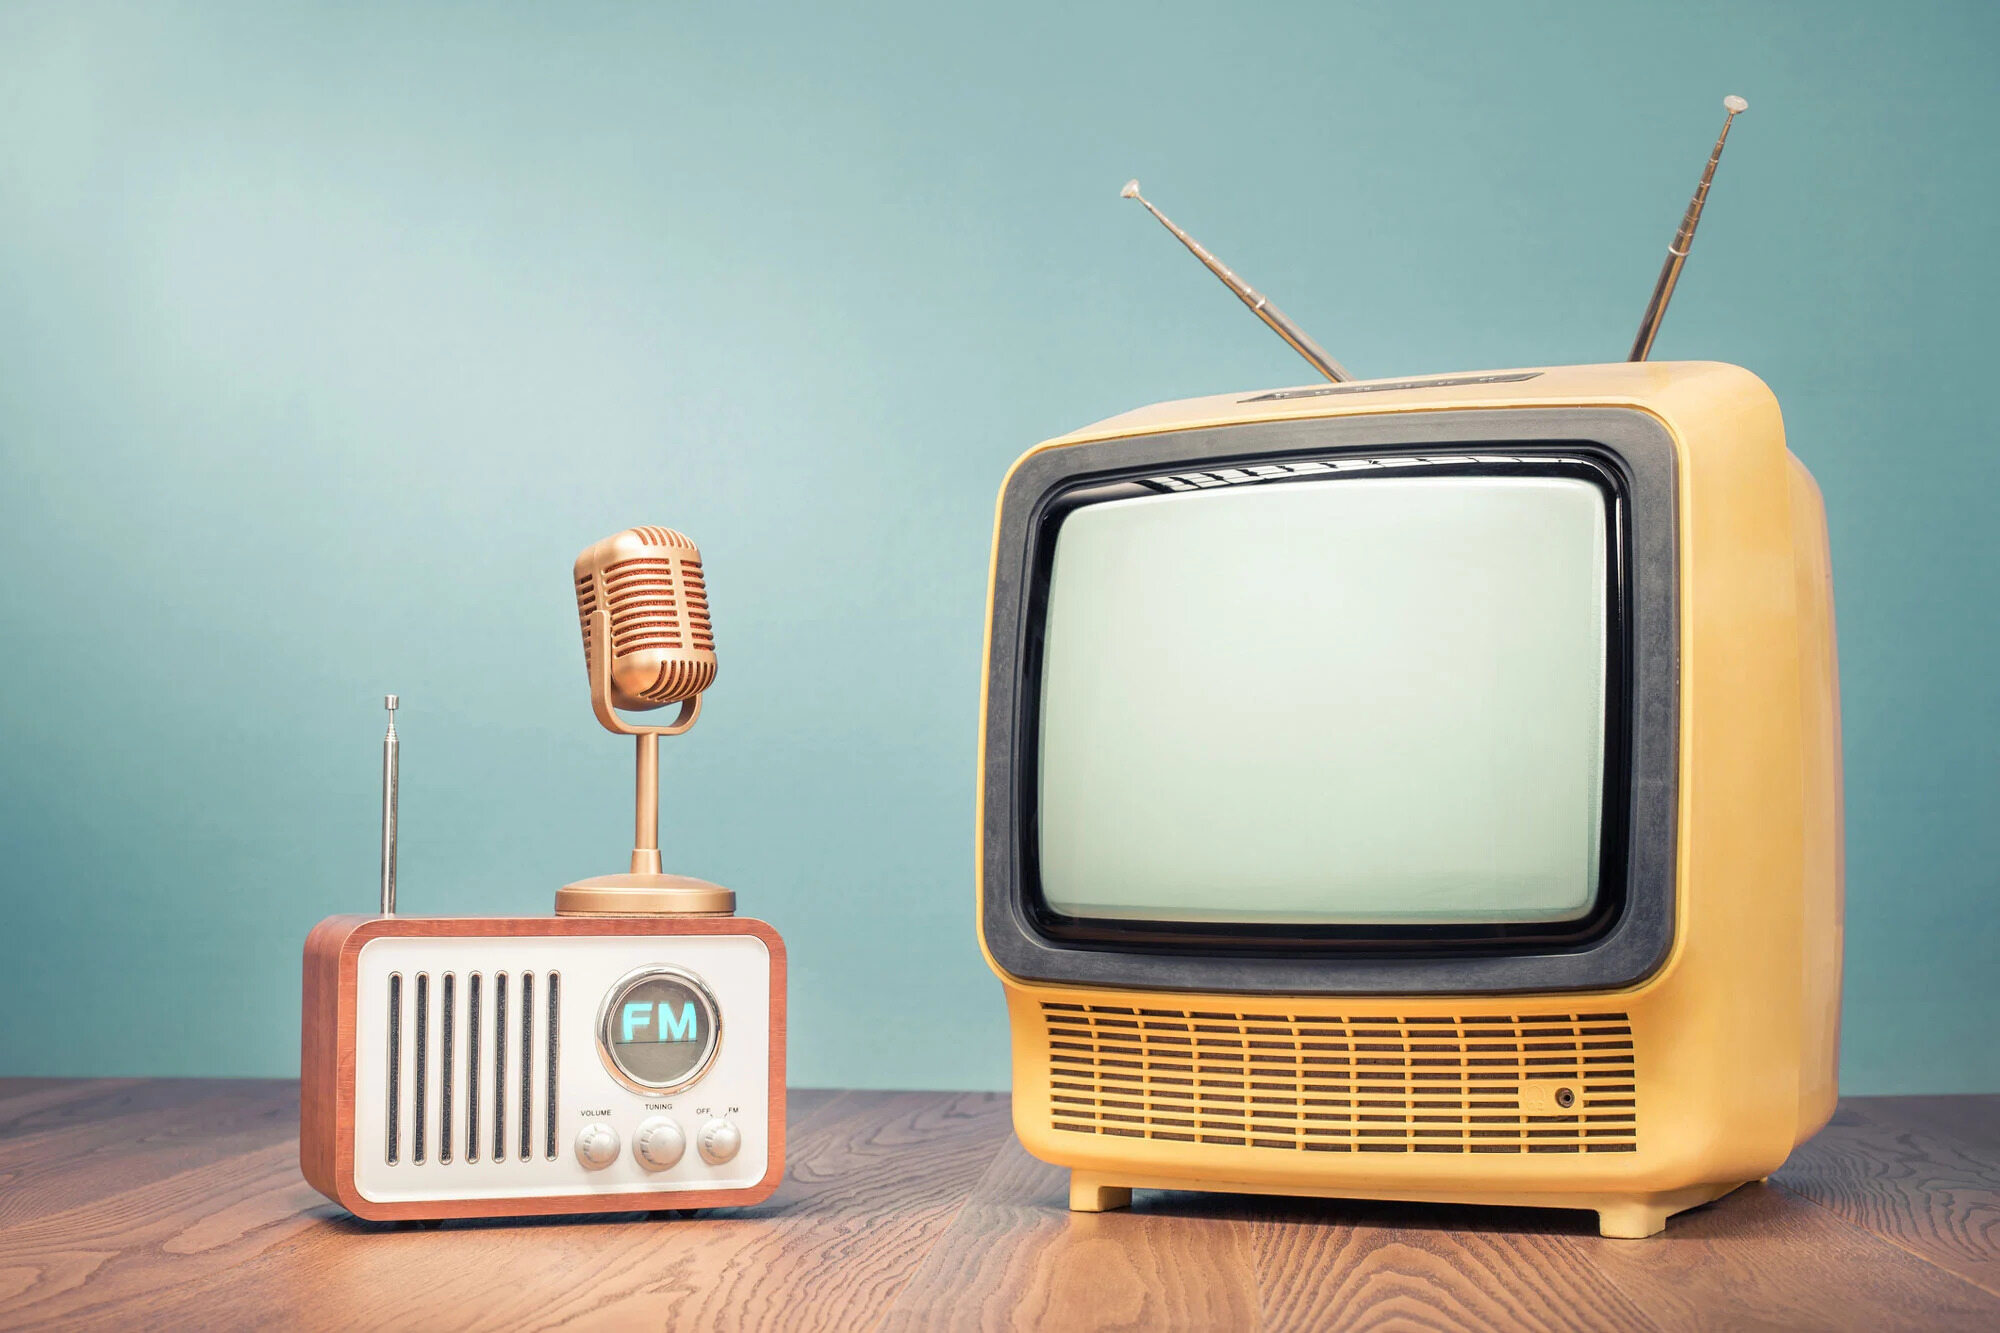 What Are Television And Radio?